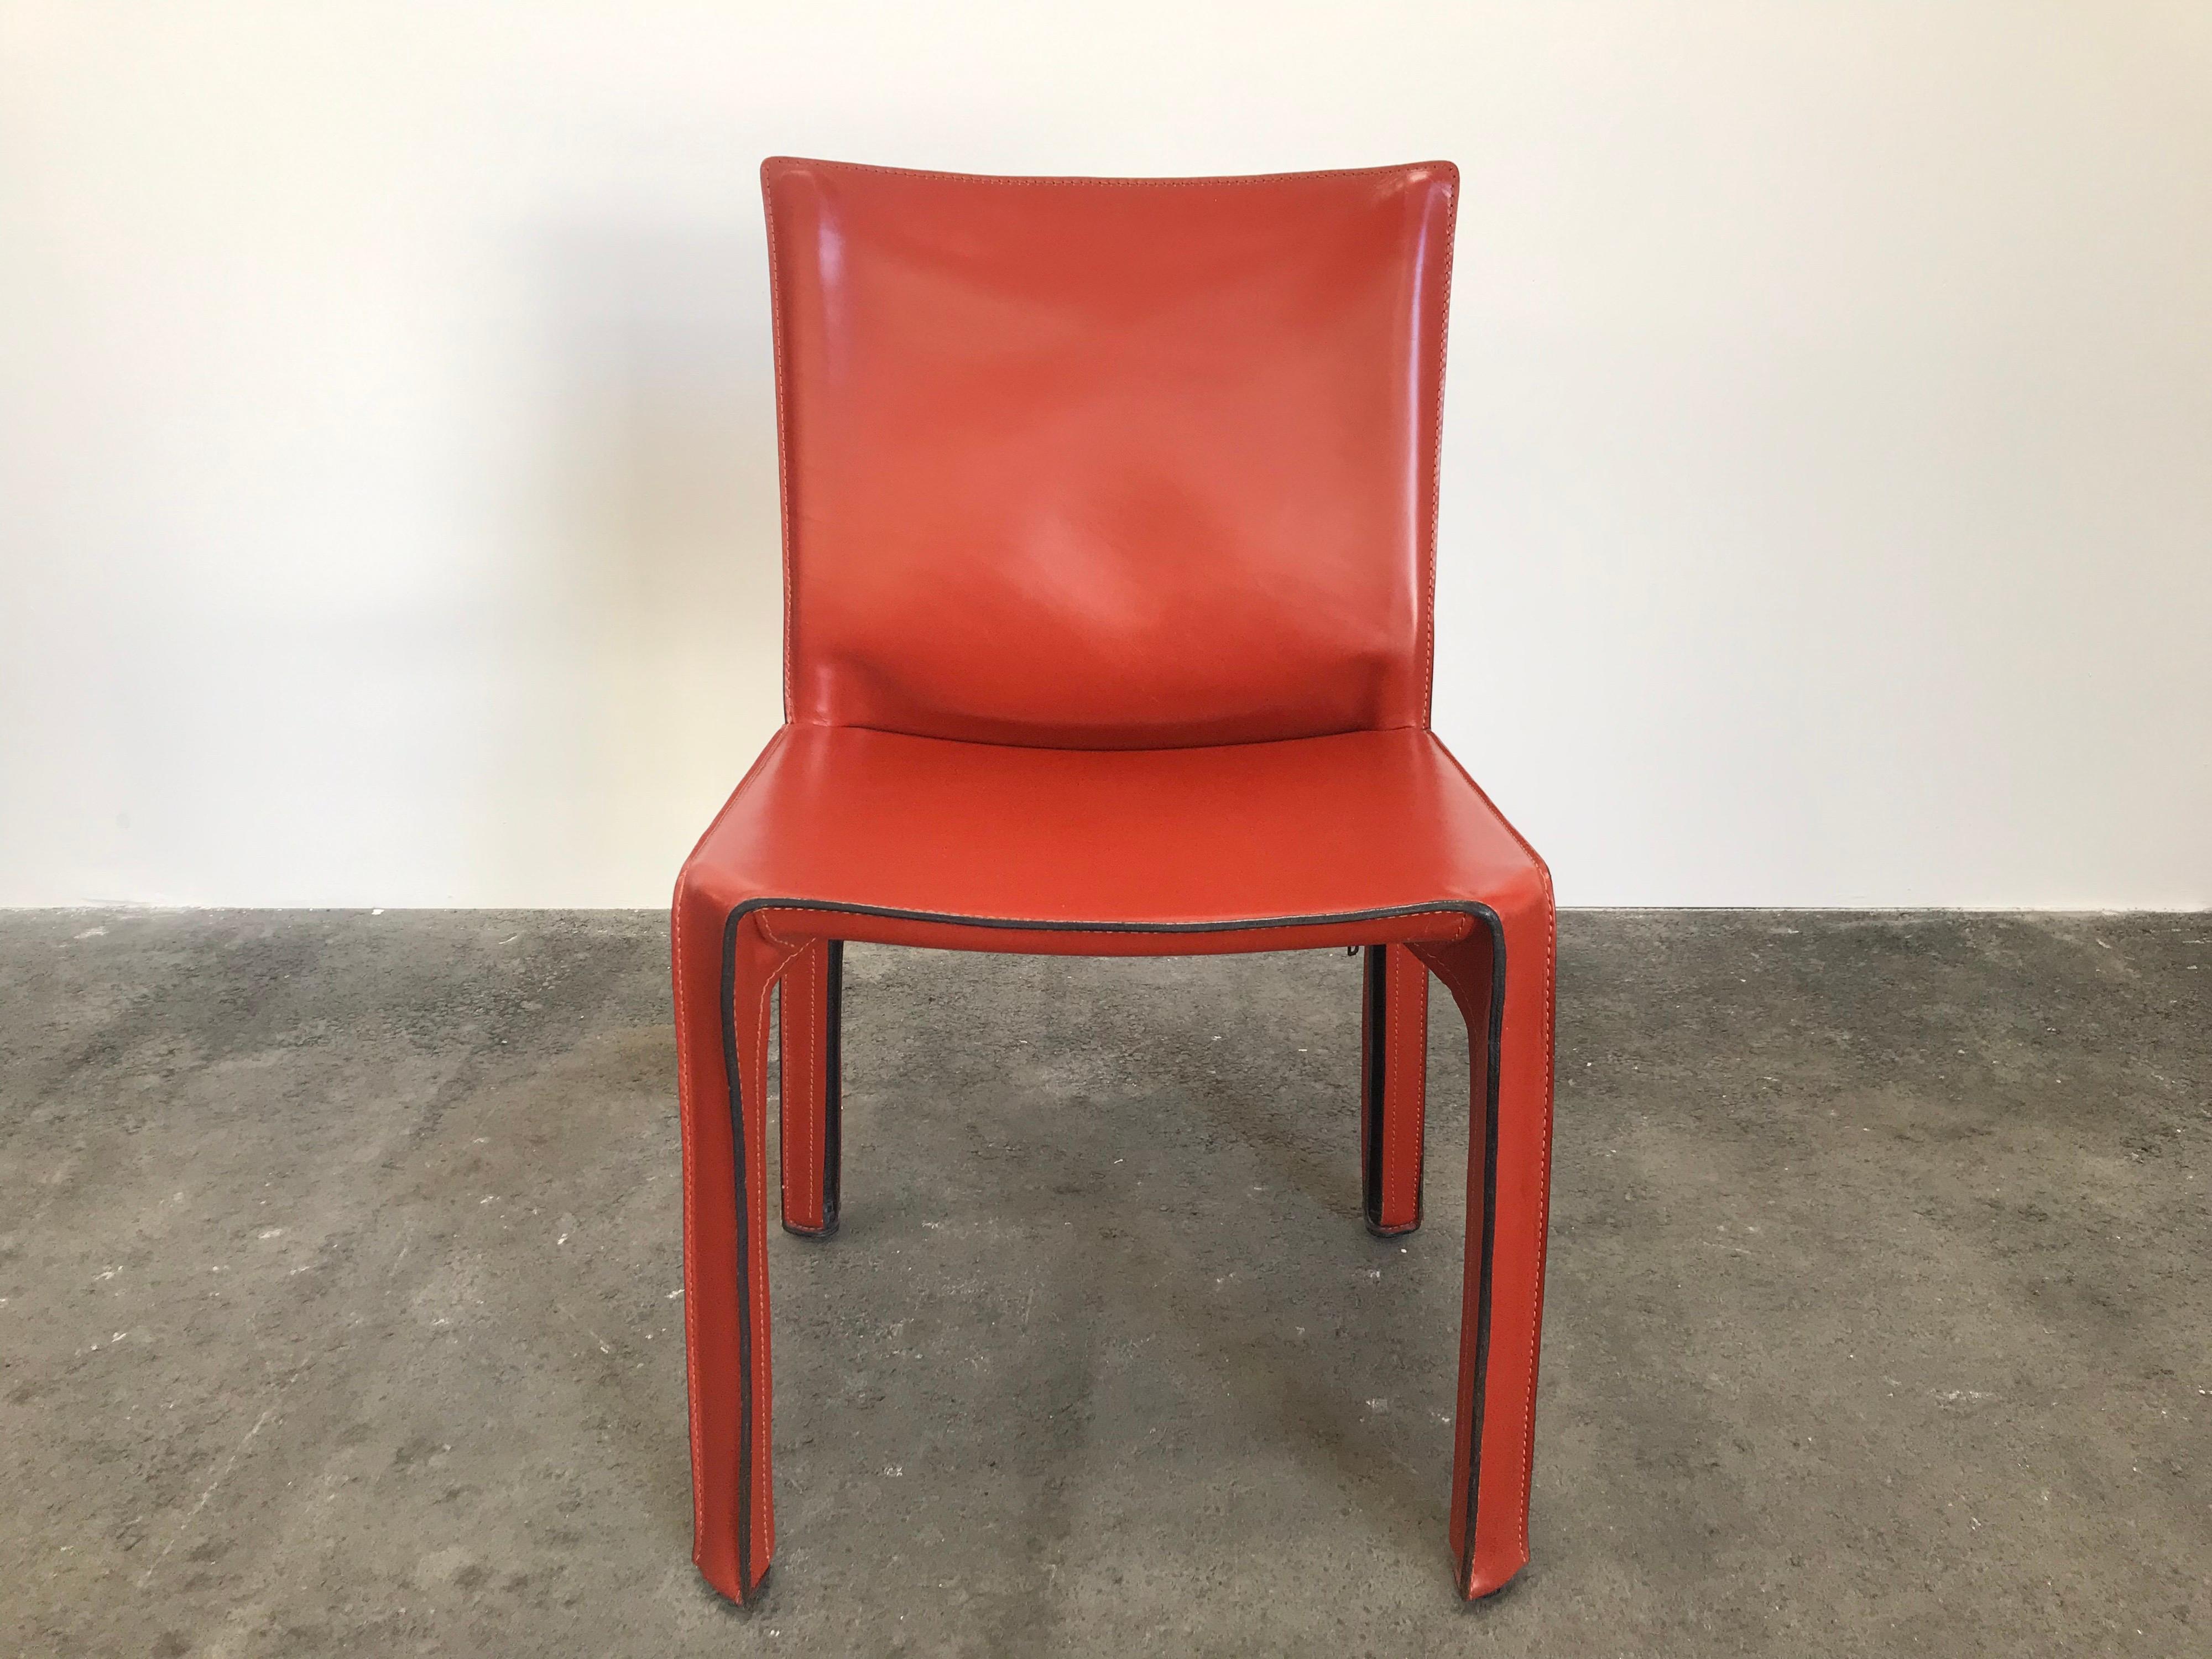 Set of 8 Mario Bellini CAB 412 chairs, made by Cassina in the 1980s. Flexible steel frame covered with a skin of high quality Russian Red (also known as Bulgarian Red) saddle leather. This elegant, versatile chair is equally suitable for the dining